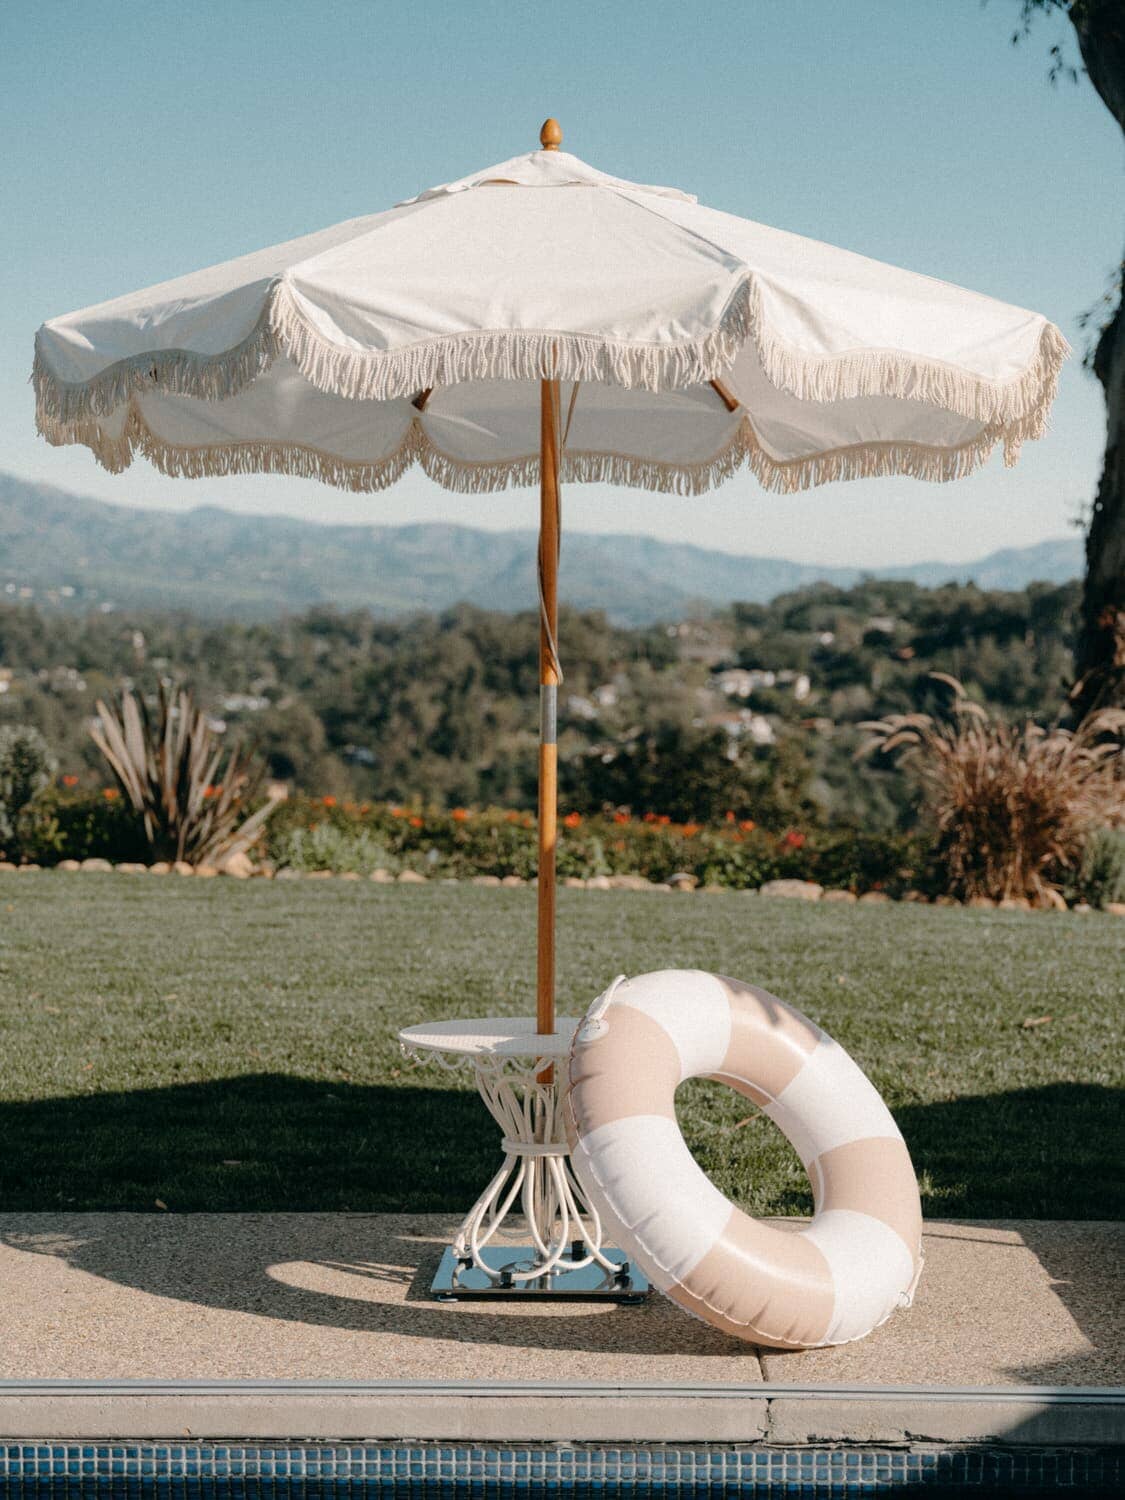 Pool float and umbrella next to a pool